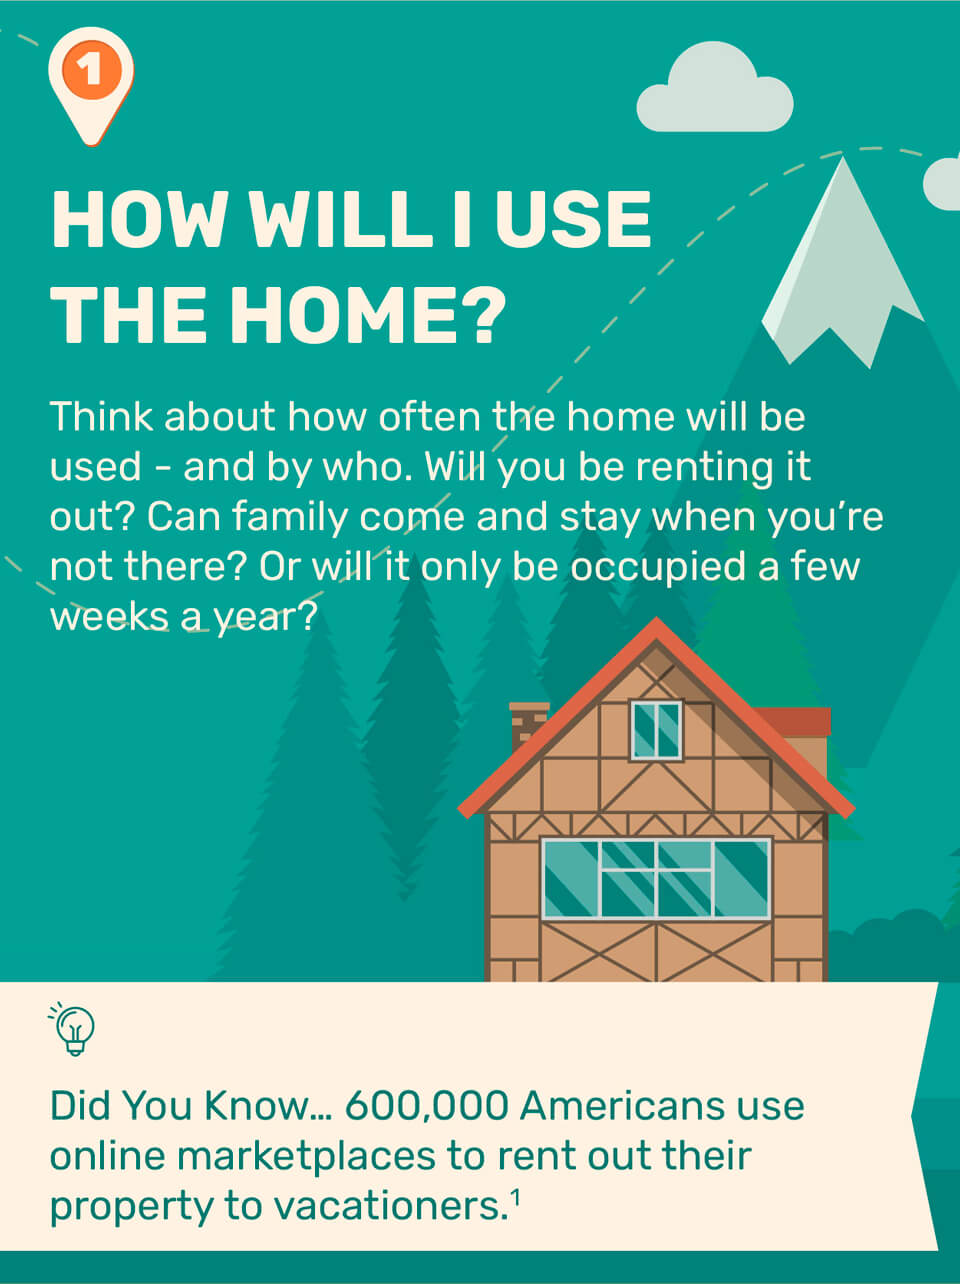 1. How Will I Use the Home? Think about how often the home will be used - and by who. Will you be renting it out? Can family come and stay when you’re not there? Or will it only be occupied a few weeks a year? Did You Know 600,000 Americans use online marketplaces to rent out their property to vacationers. Source 1.